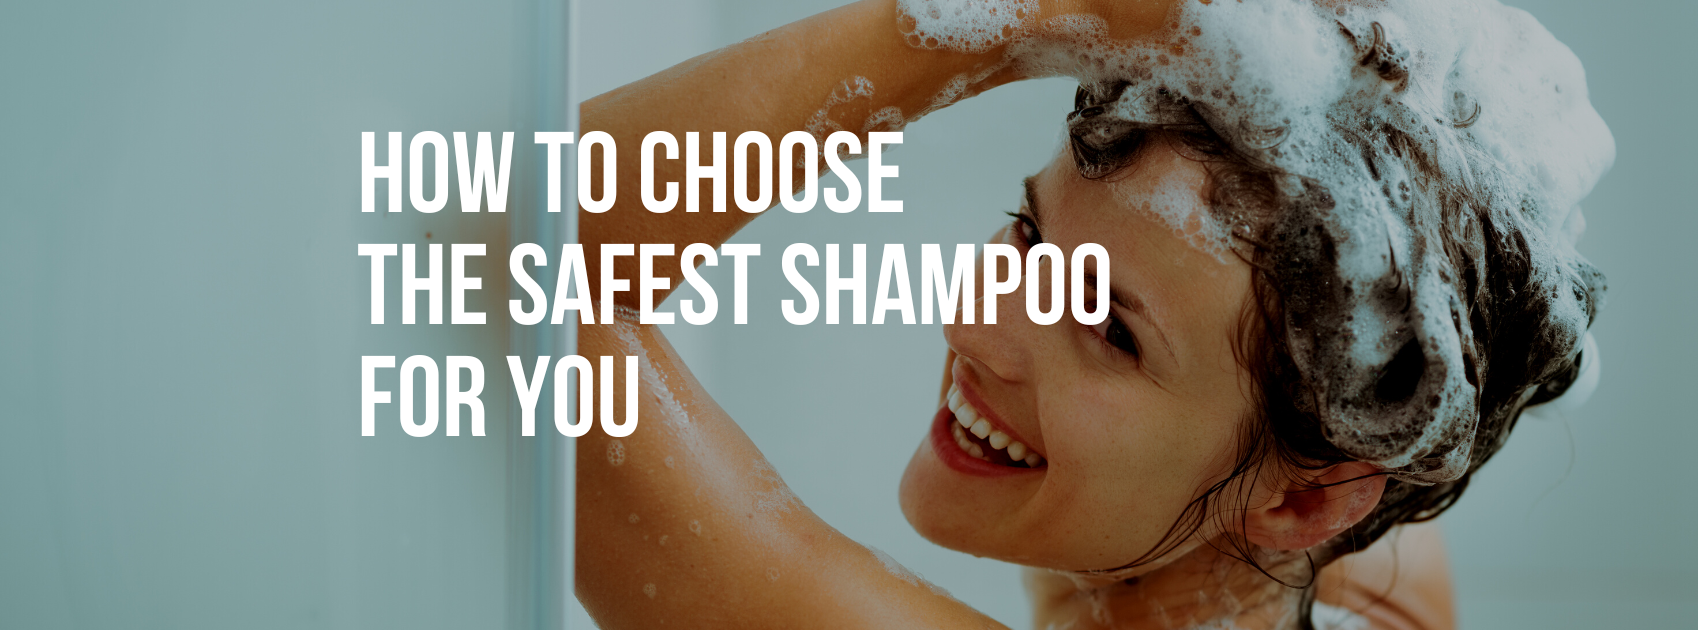 How to Choose the Safest Shampoo for You